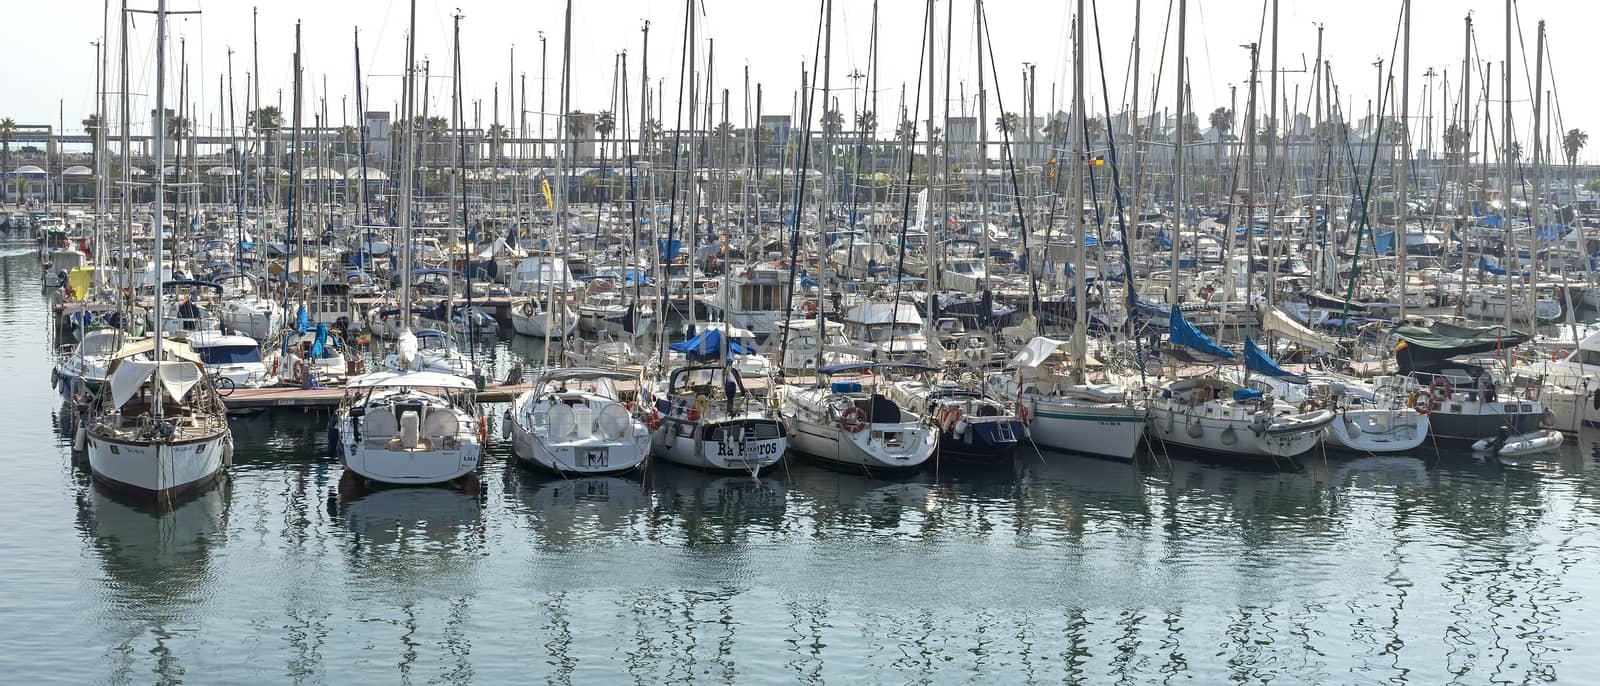 BARCELONA, SPAIN - JULY 12, 2015: Yachts and sailboats in Port Vell marina in Barcelona, Catalonia, Spain. This port one of the old ports of Barcelona.

Barcelona, Spain - July 12, 2015: Yachts and sailboats in Port Vell marina in Barcelona, Catalonia, Spain. This port one of the old ports of Barcelona.